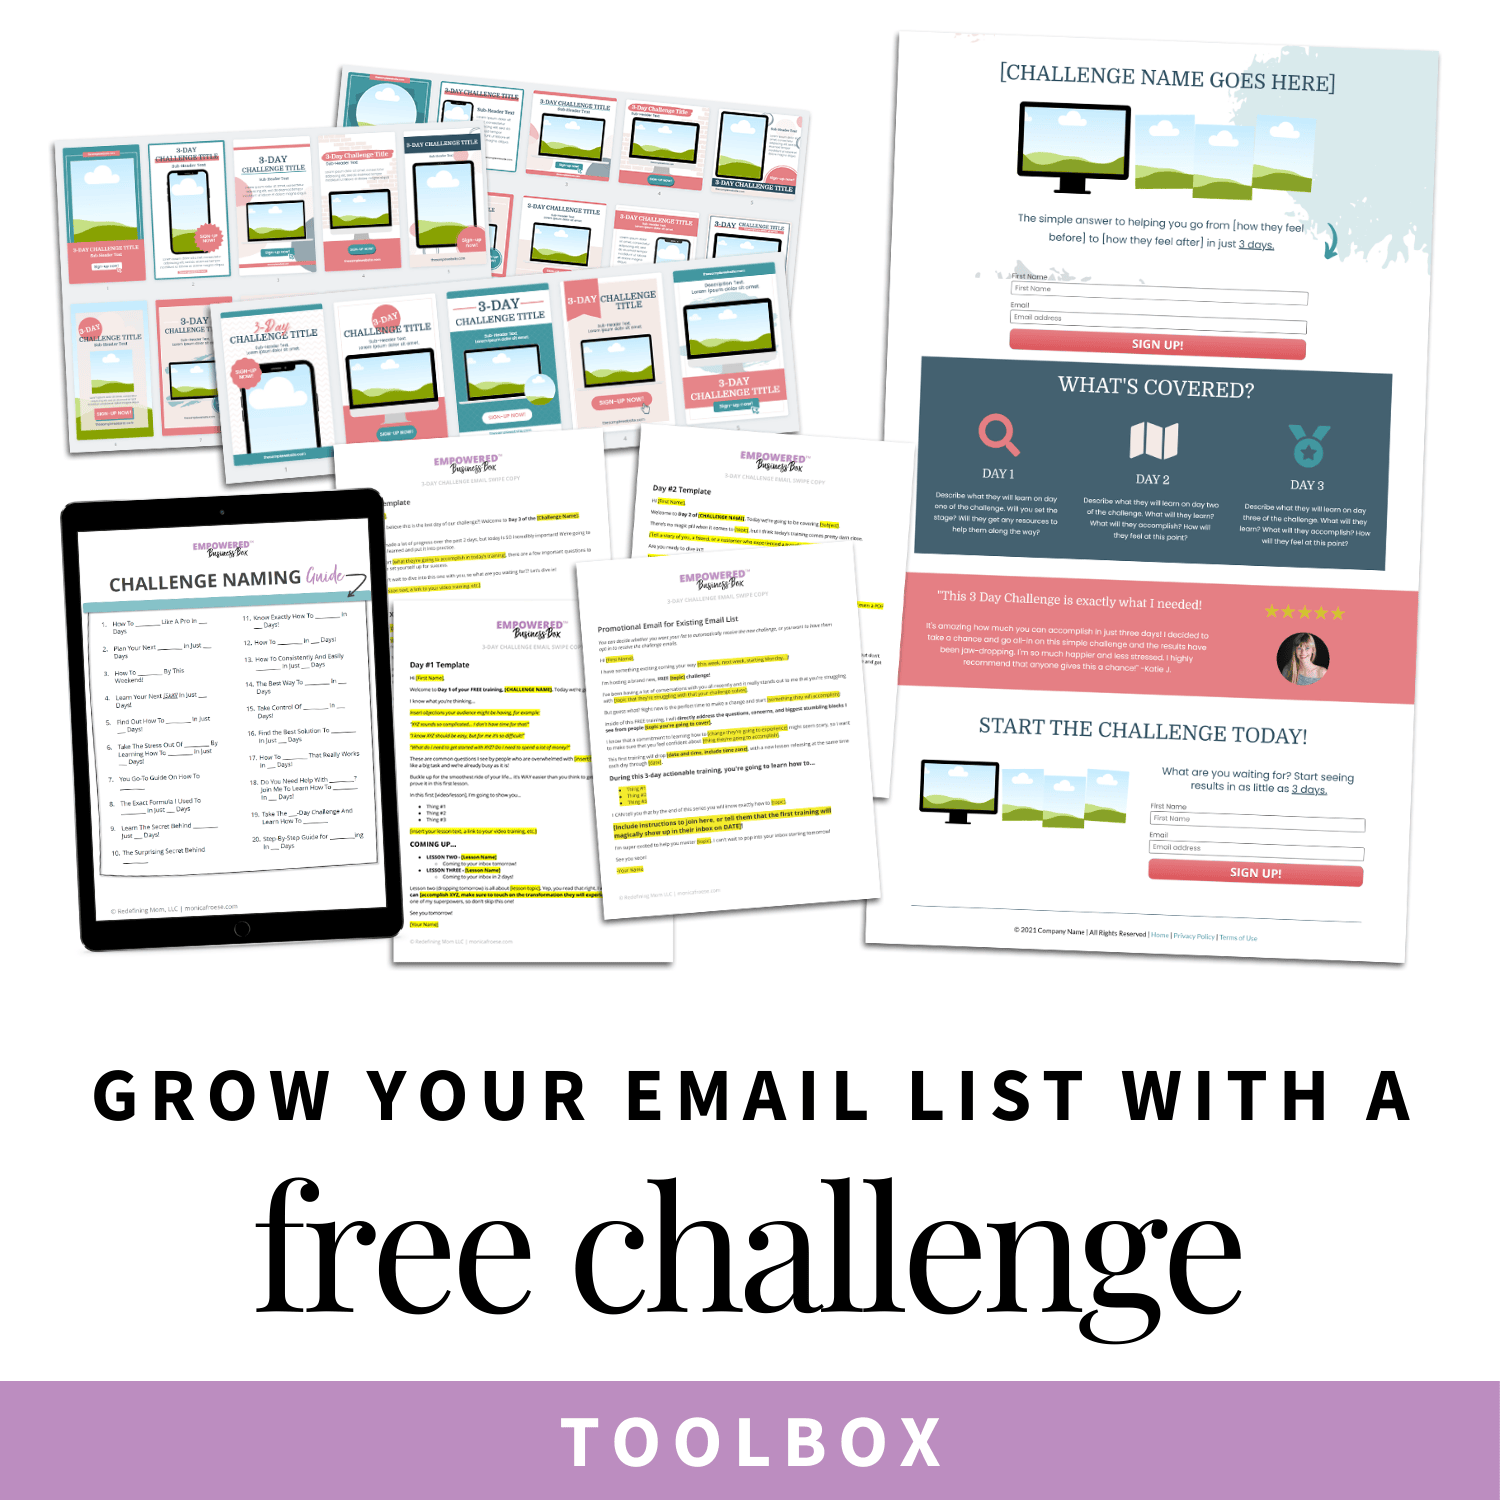 Grow your email list with a free challenge toolbox